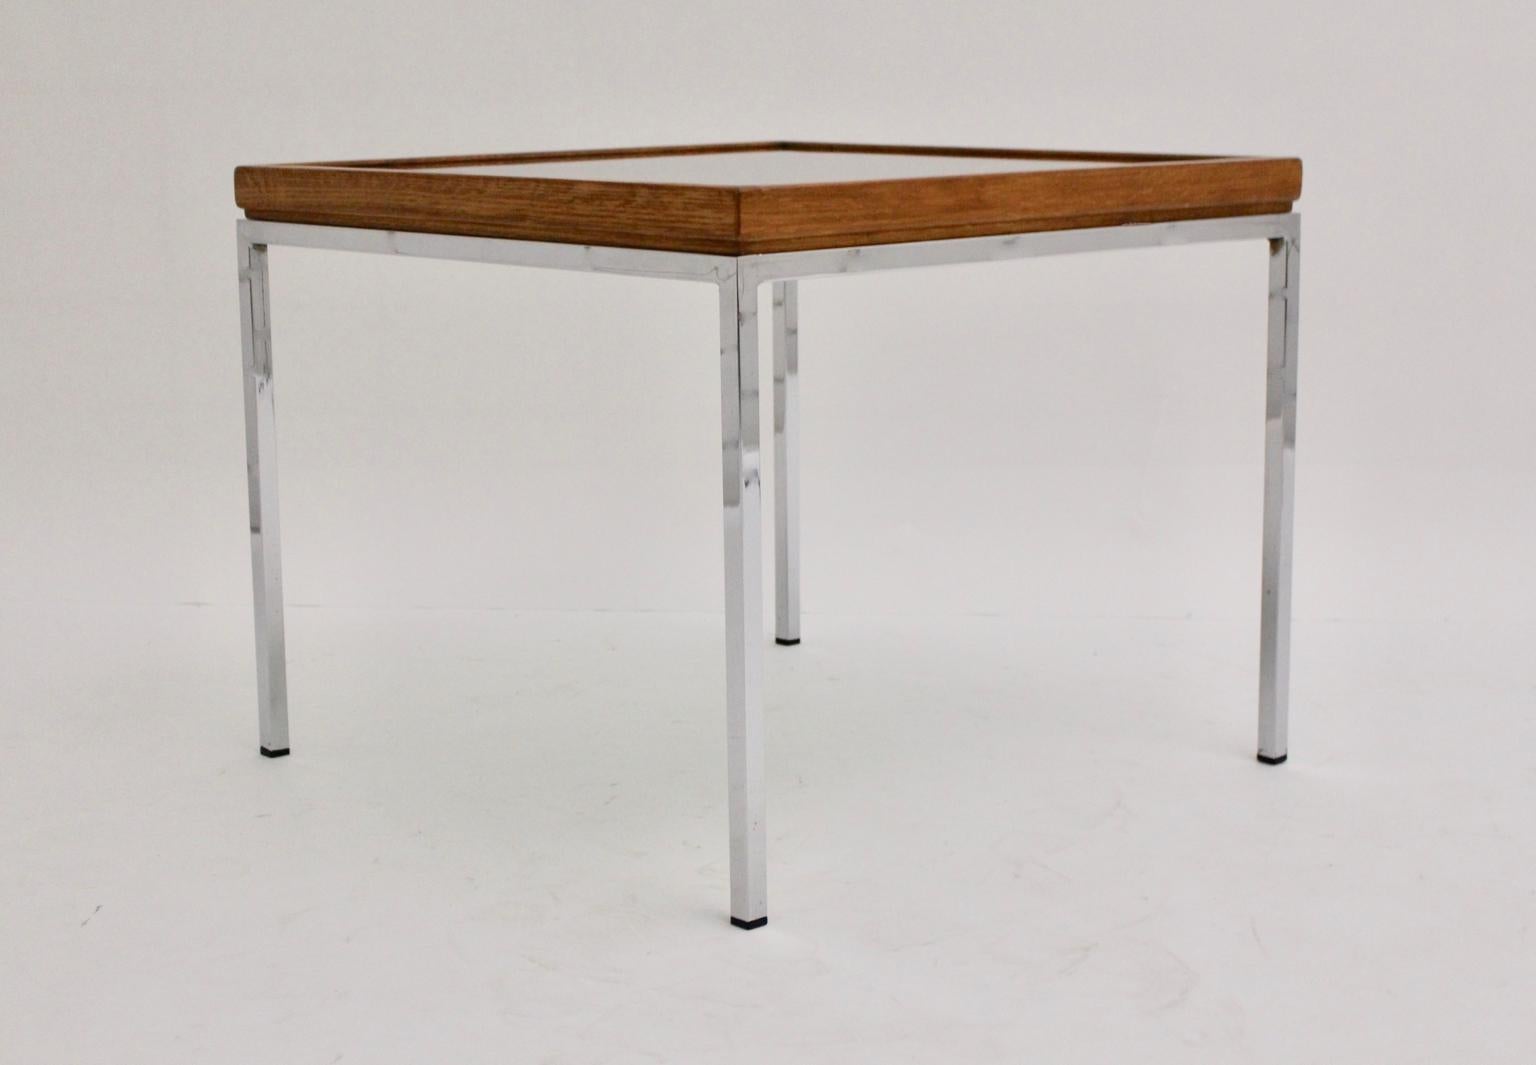 Late 20th Century Mid-Century Modern Vintage Chrome and Oak Square Coffee Table, Austria, 1970s For Sale